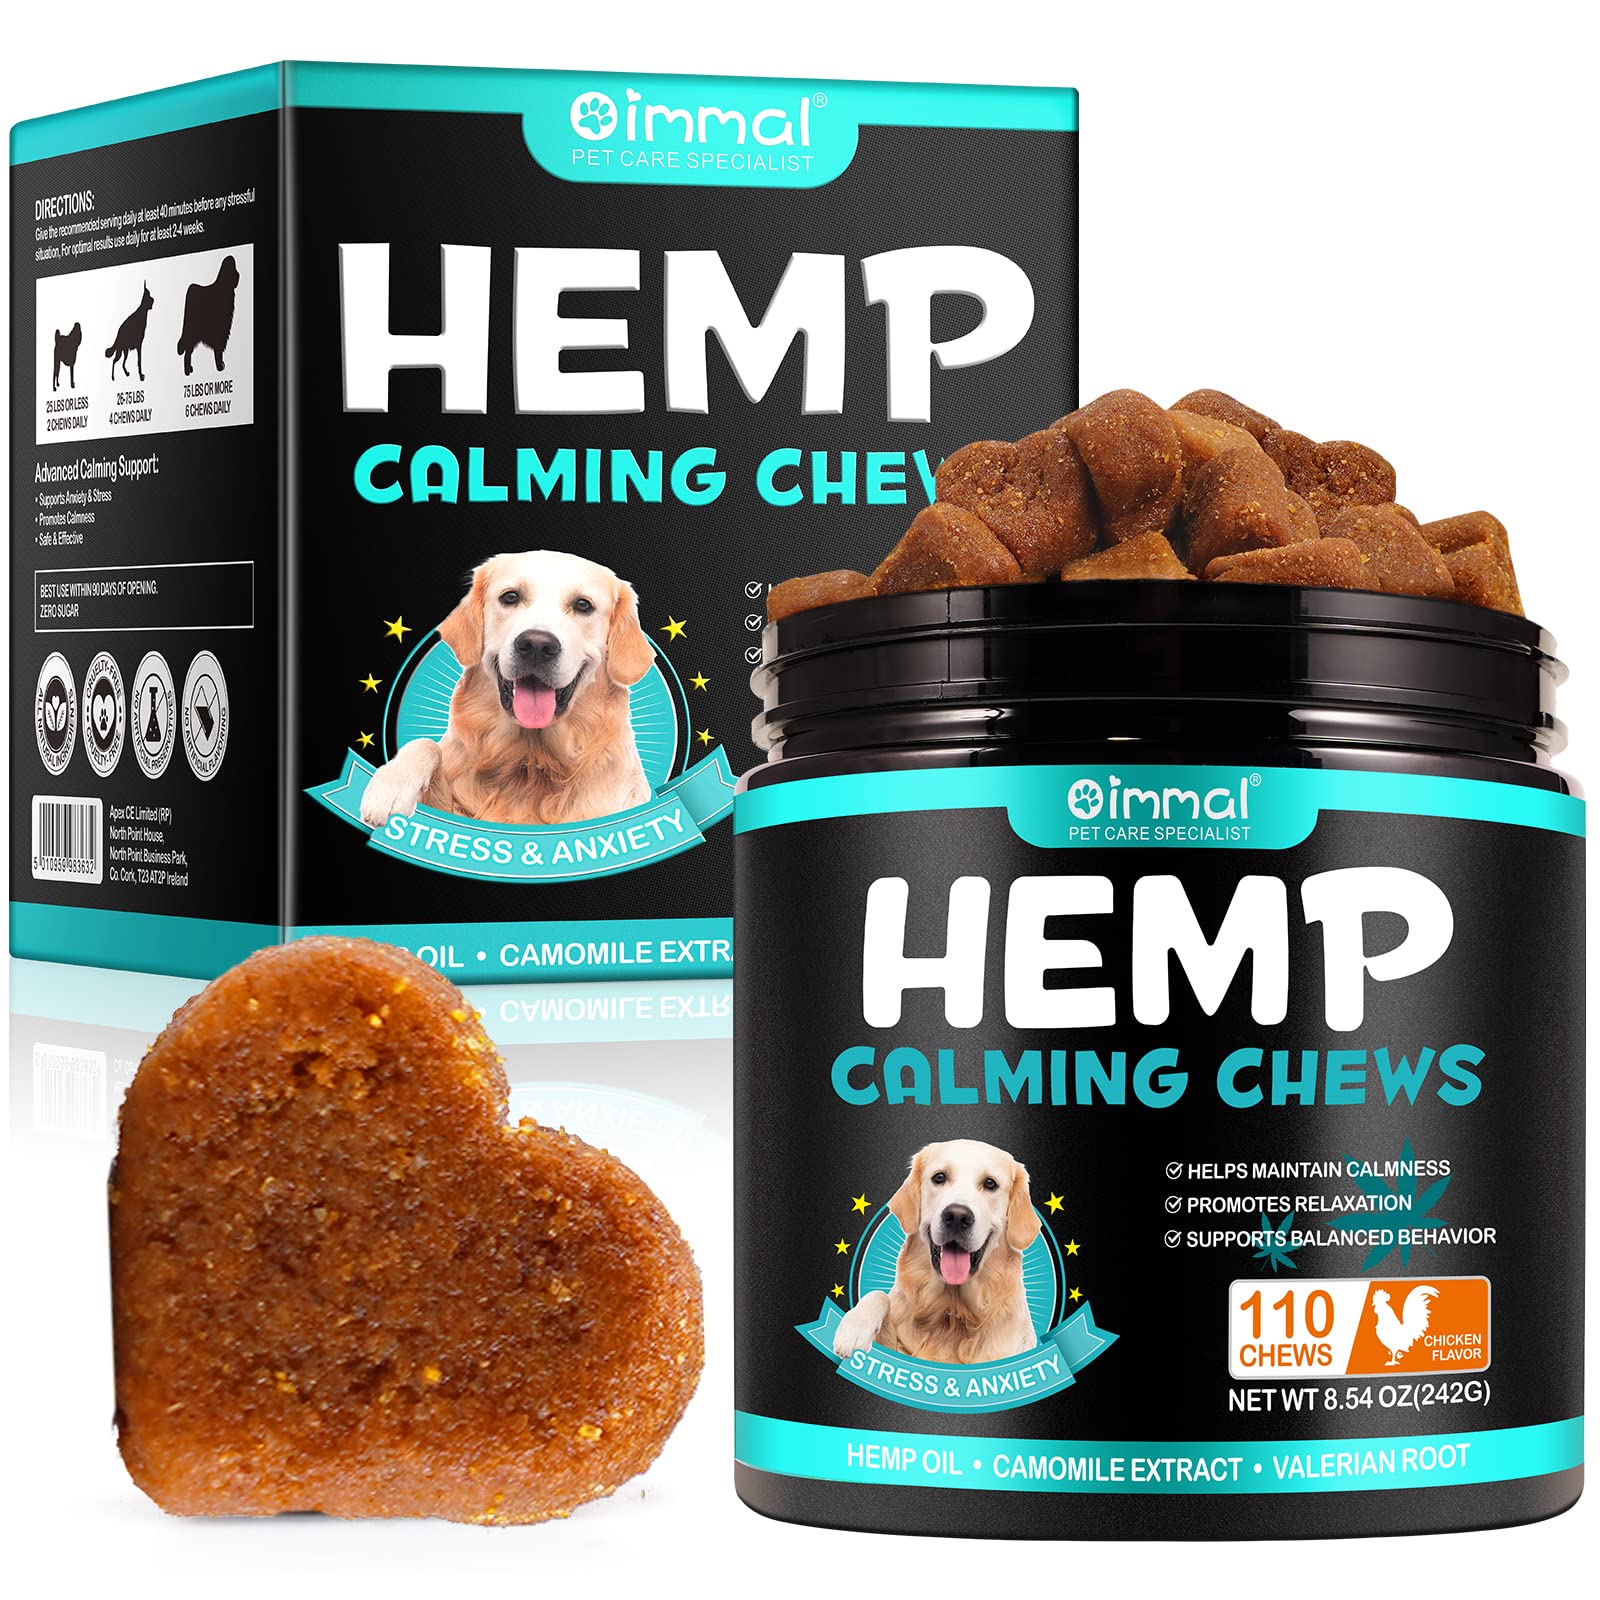 PLSHSBSE Hemp Calming Chews for Dogs, 110PCS Calming Treats for Dogs Anxiety Relief, Advanced Dog Calming Chews, Sleep Aids for Dogs Traval-Thunderstorm-Seperations (Chicken Flavor)